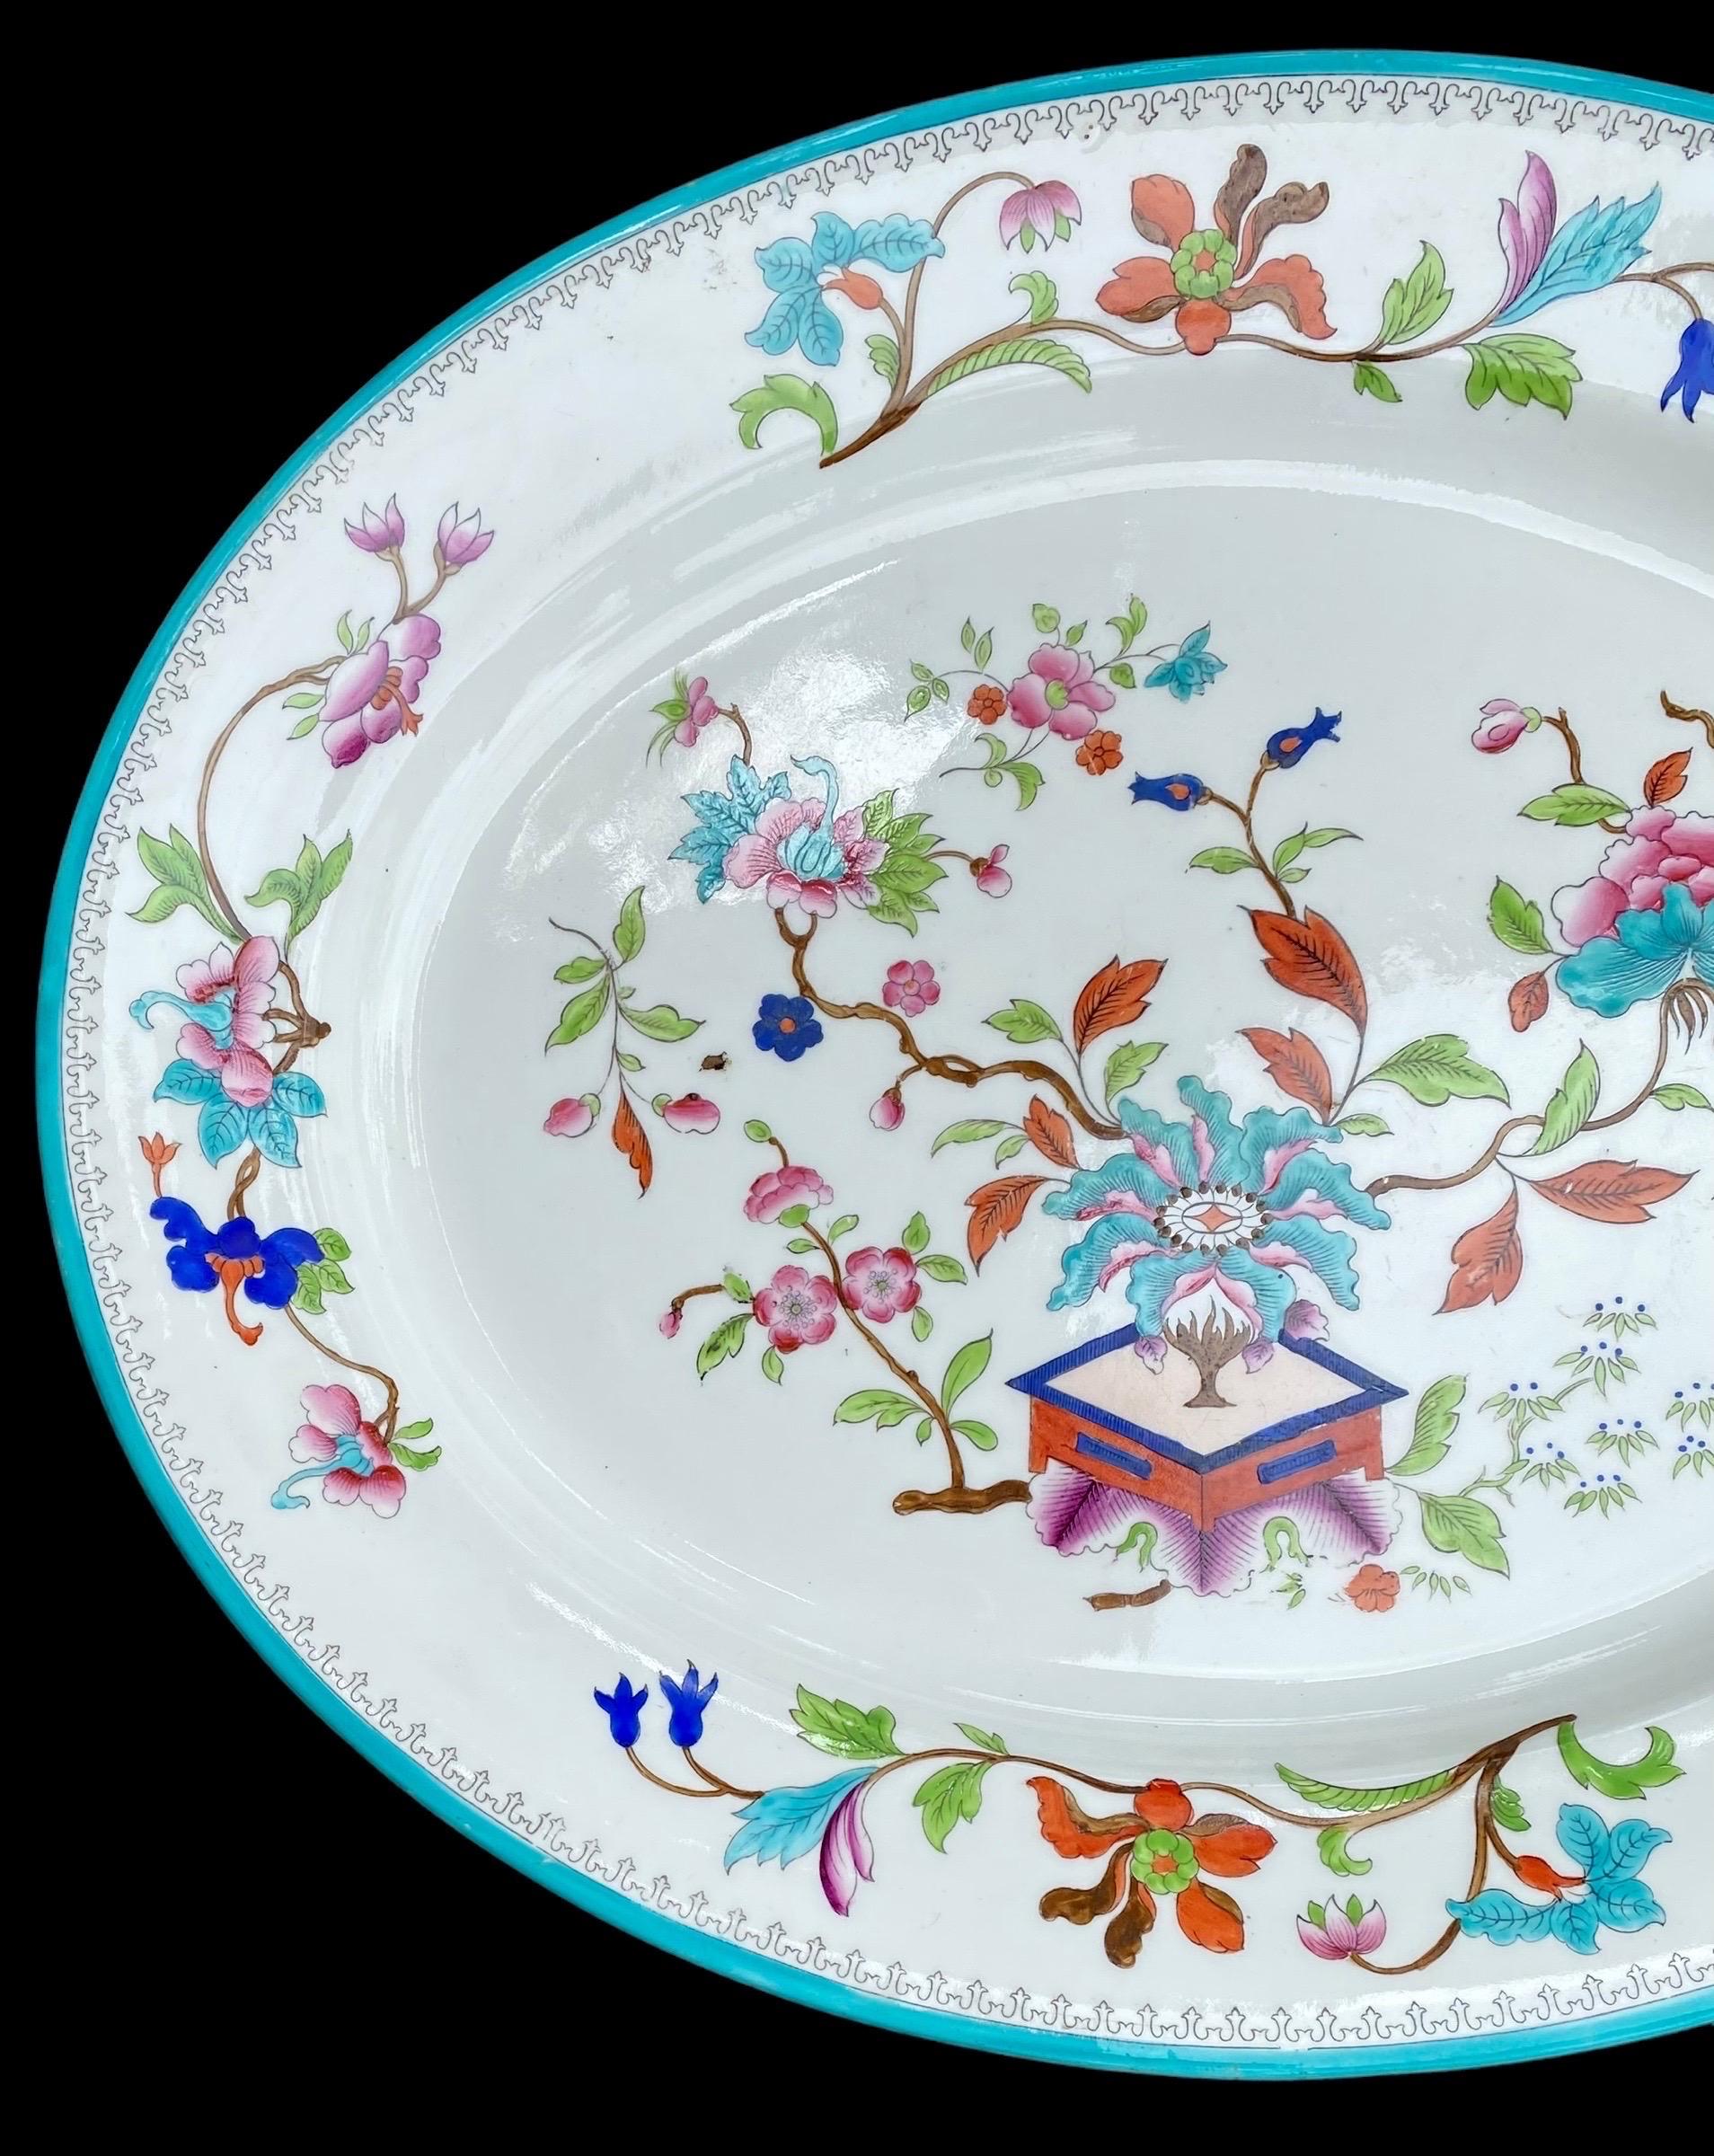 This is a large antique oval meat platter. A Chinese Export porcelain hand painted serving plate, circa 1900-1920

A beautifully rendered Chinese export decorative serving plate of generous proportion.
Gently used and in good condition.

Fine off